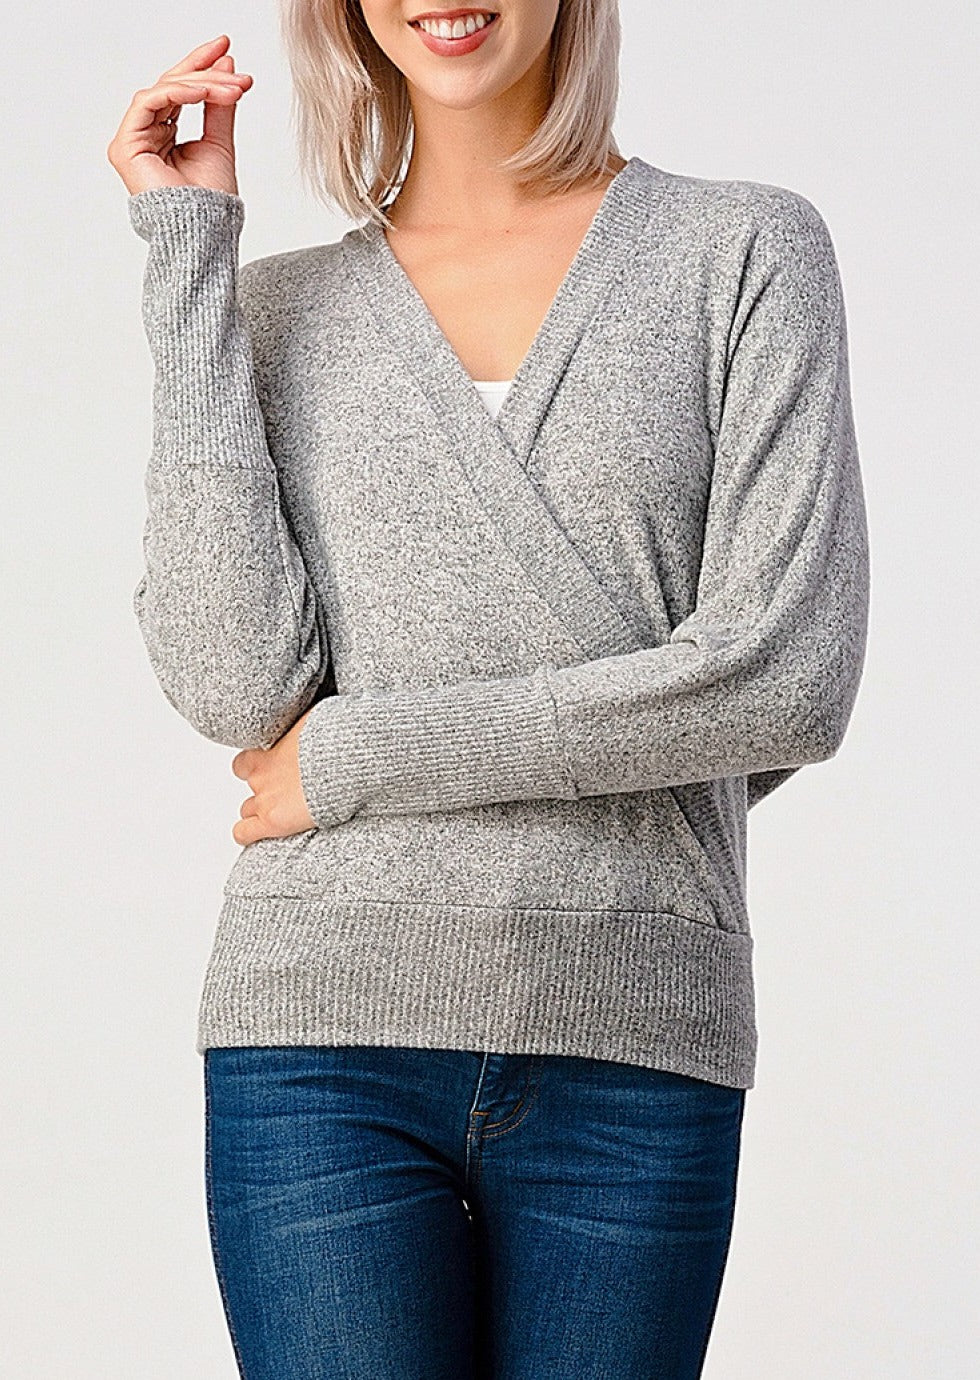 Natural Vibe Wrap Sweater (Heather Grey)